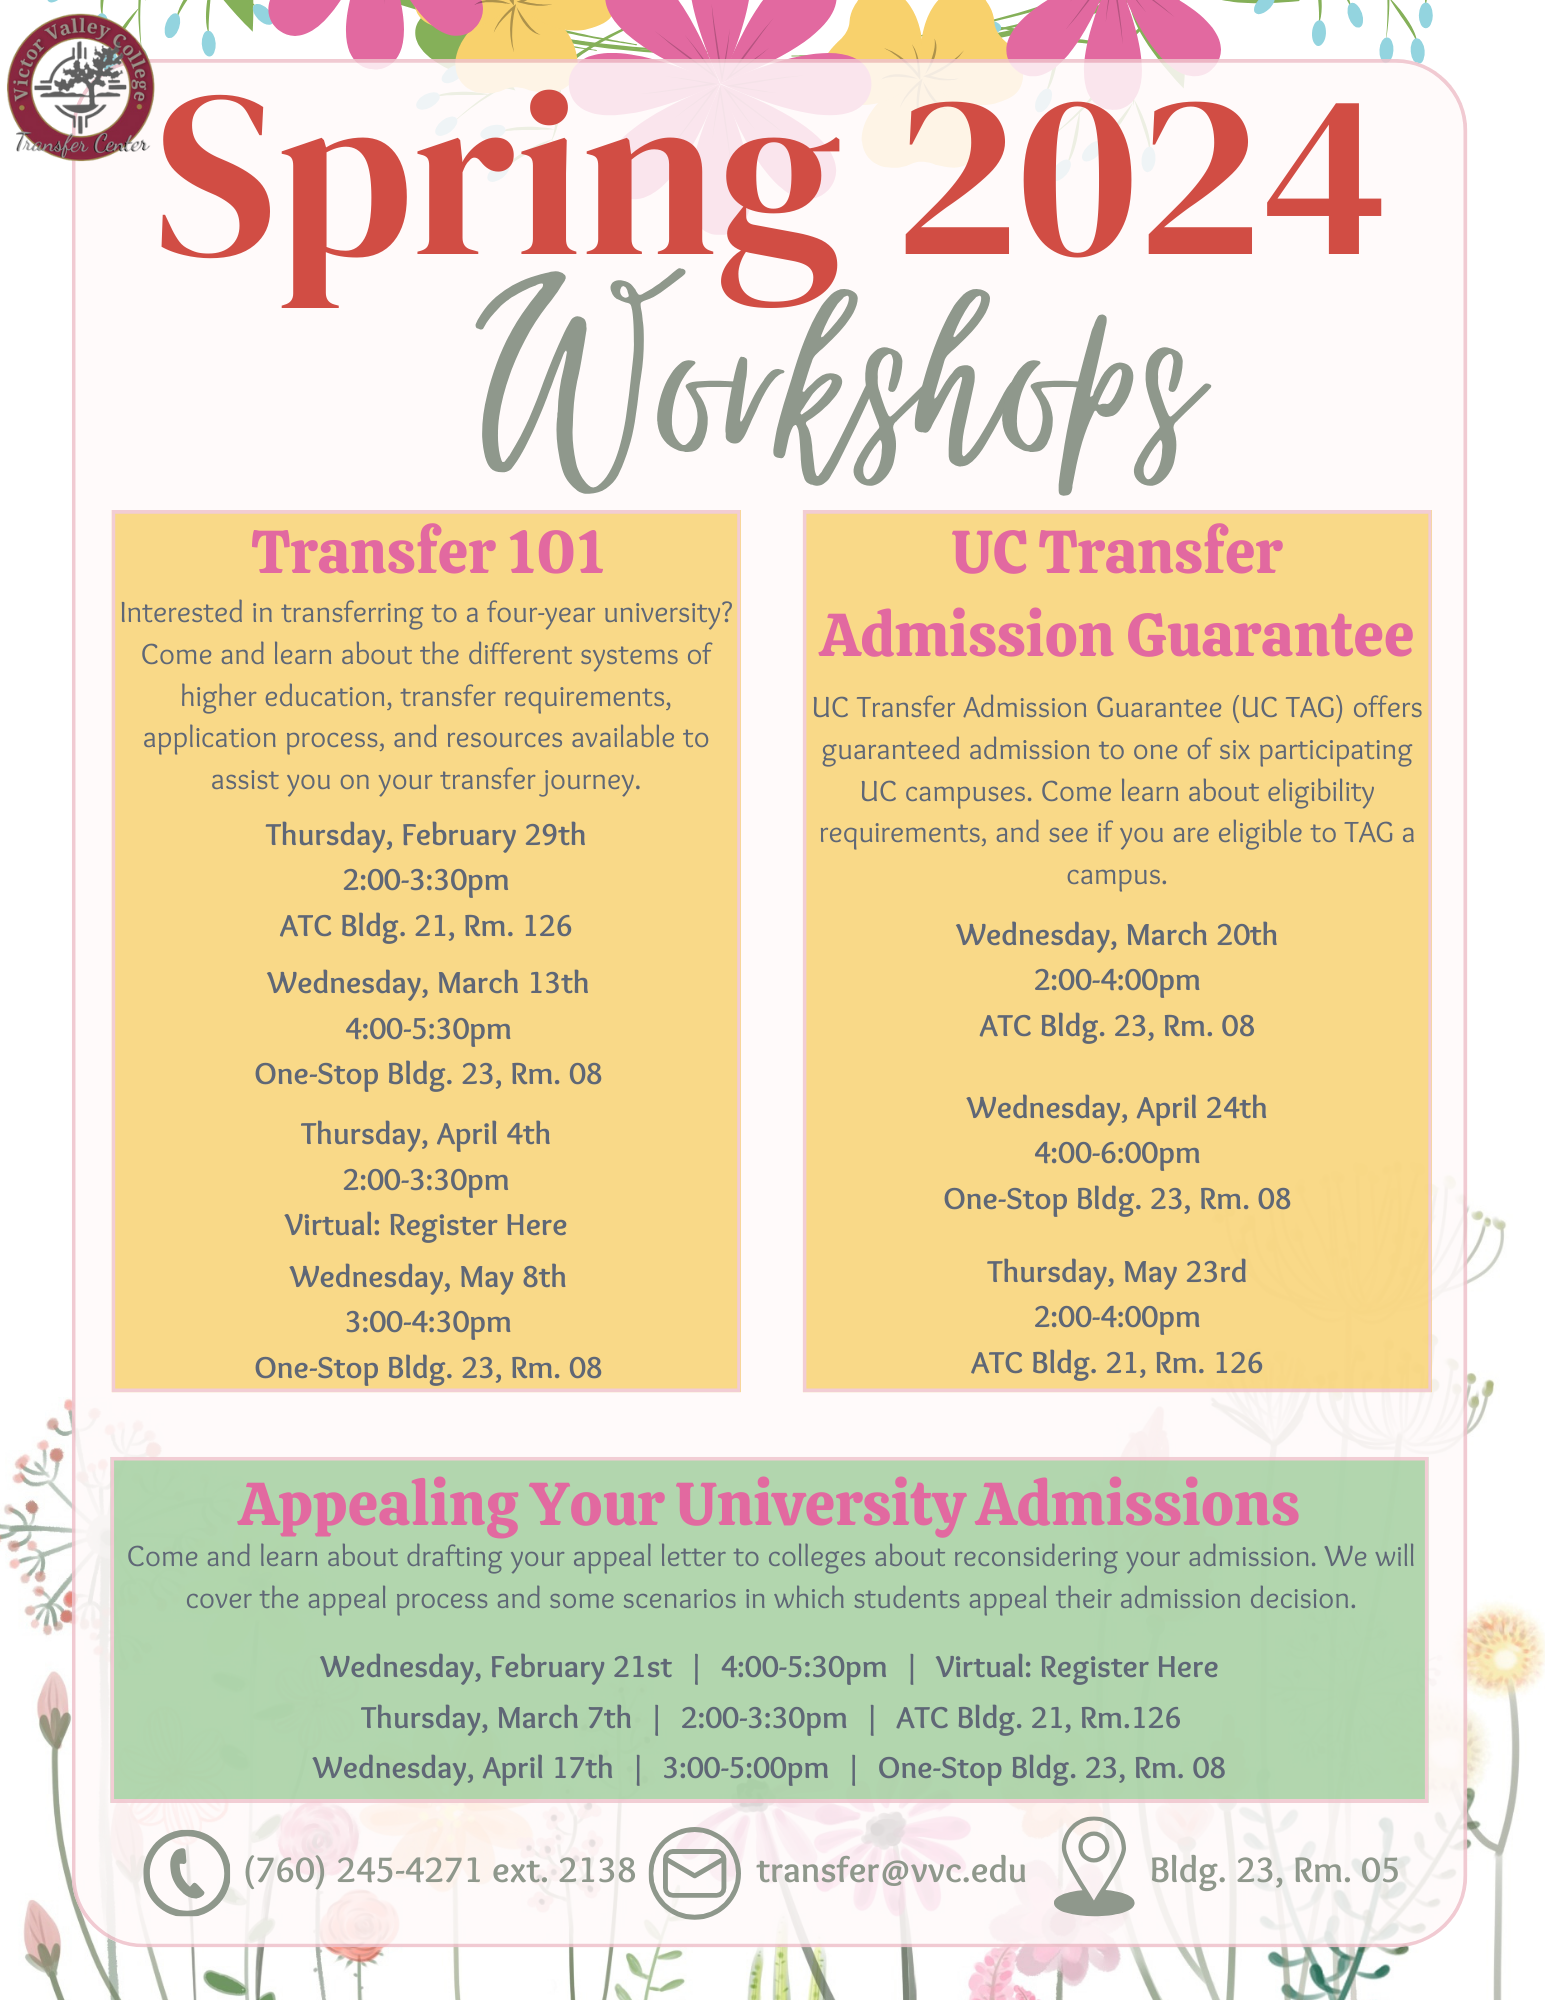 This image displays the flyer for Victor Valley College's Transfer Center workshops for the Spring 2024 term.